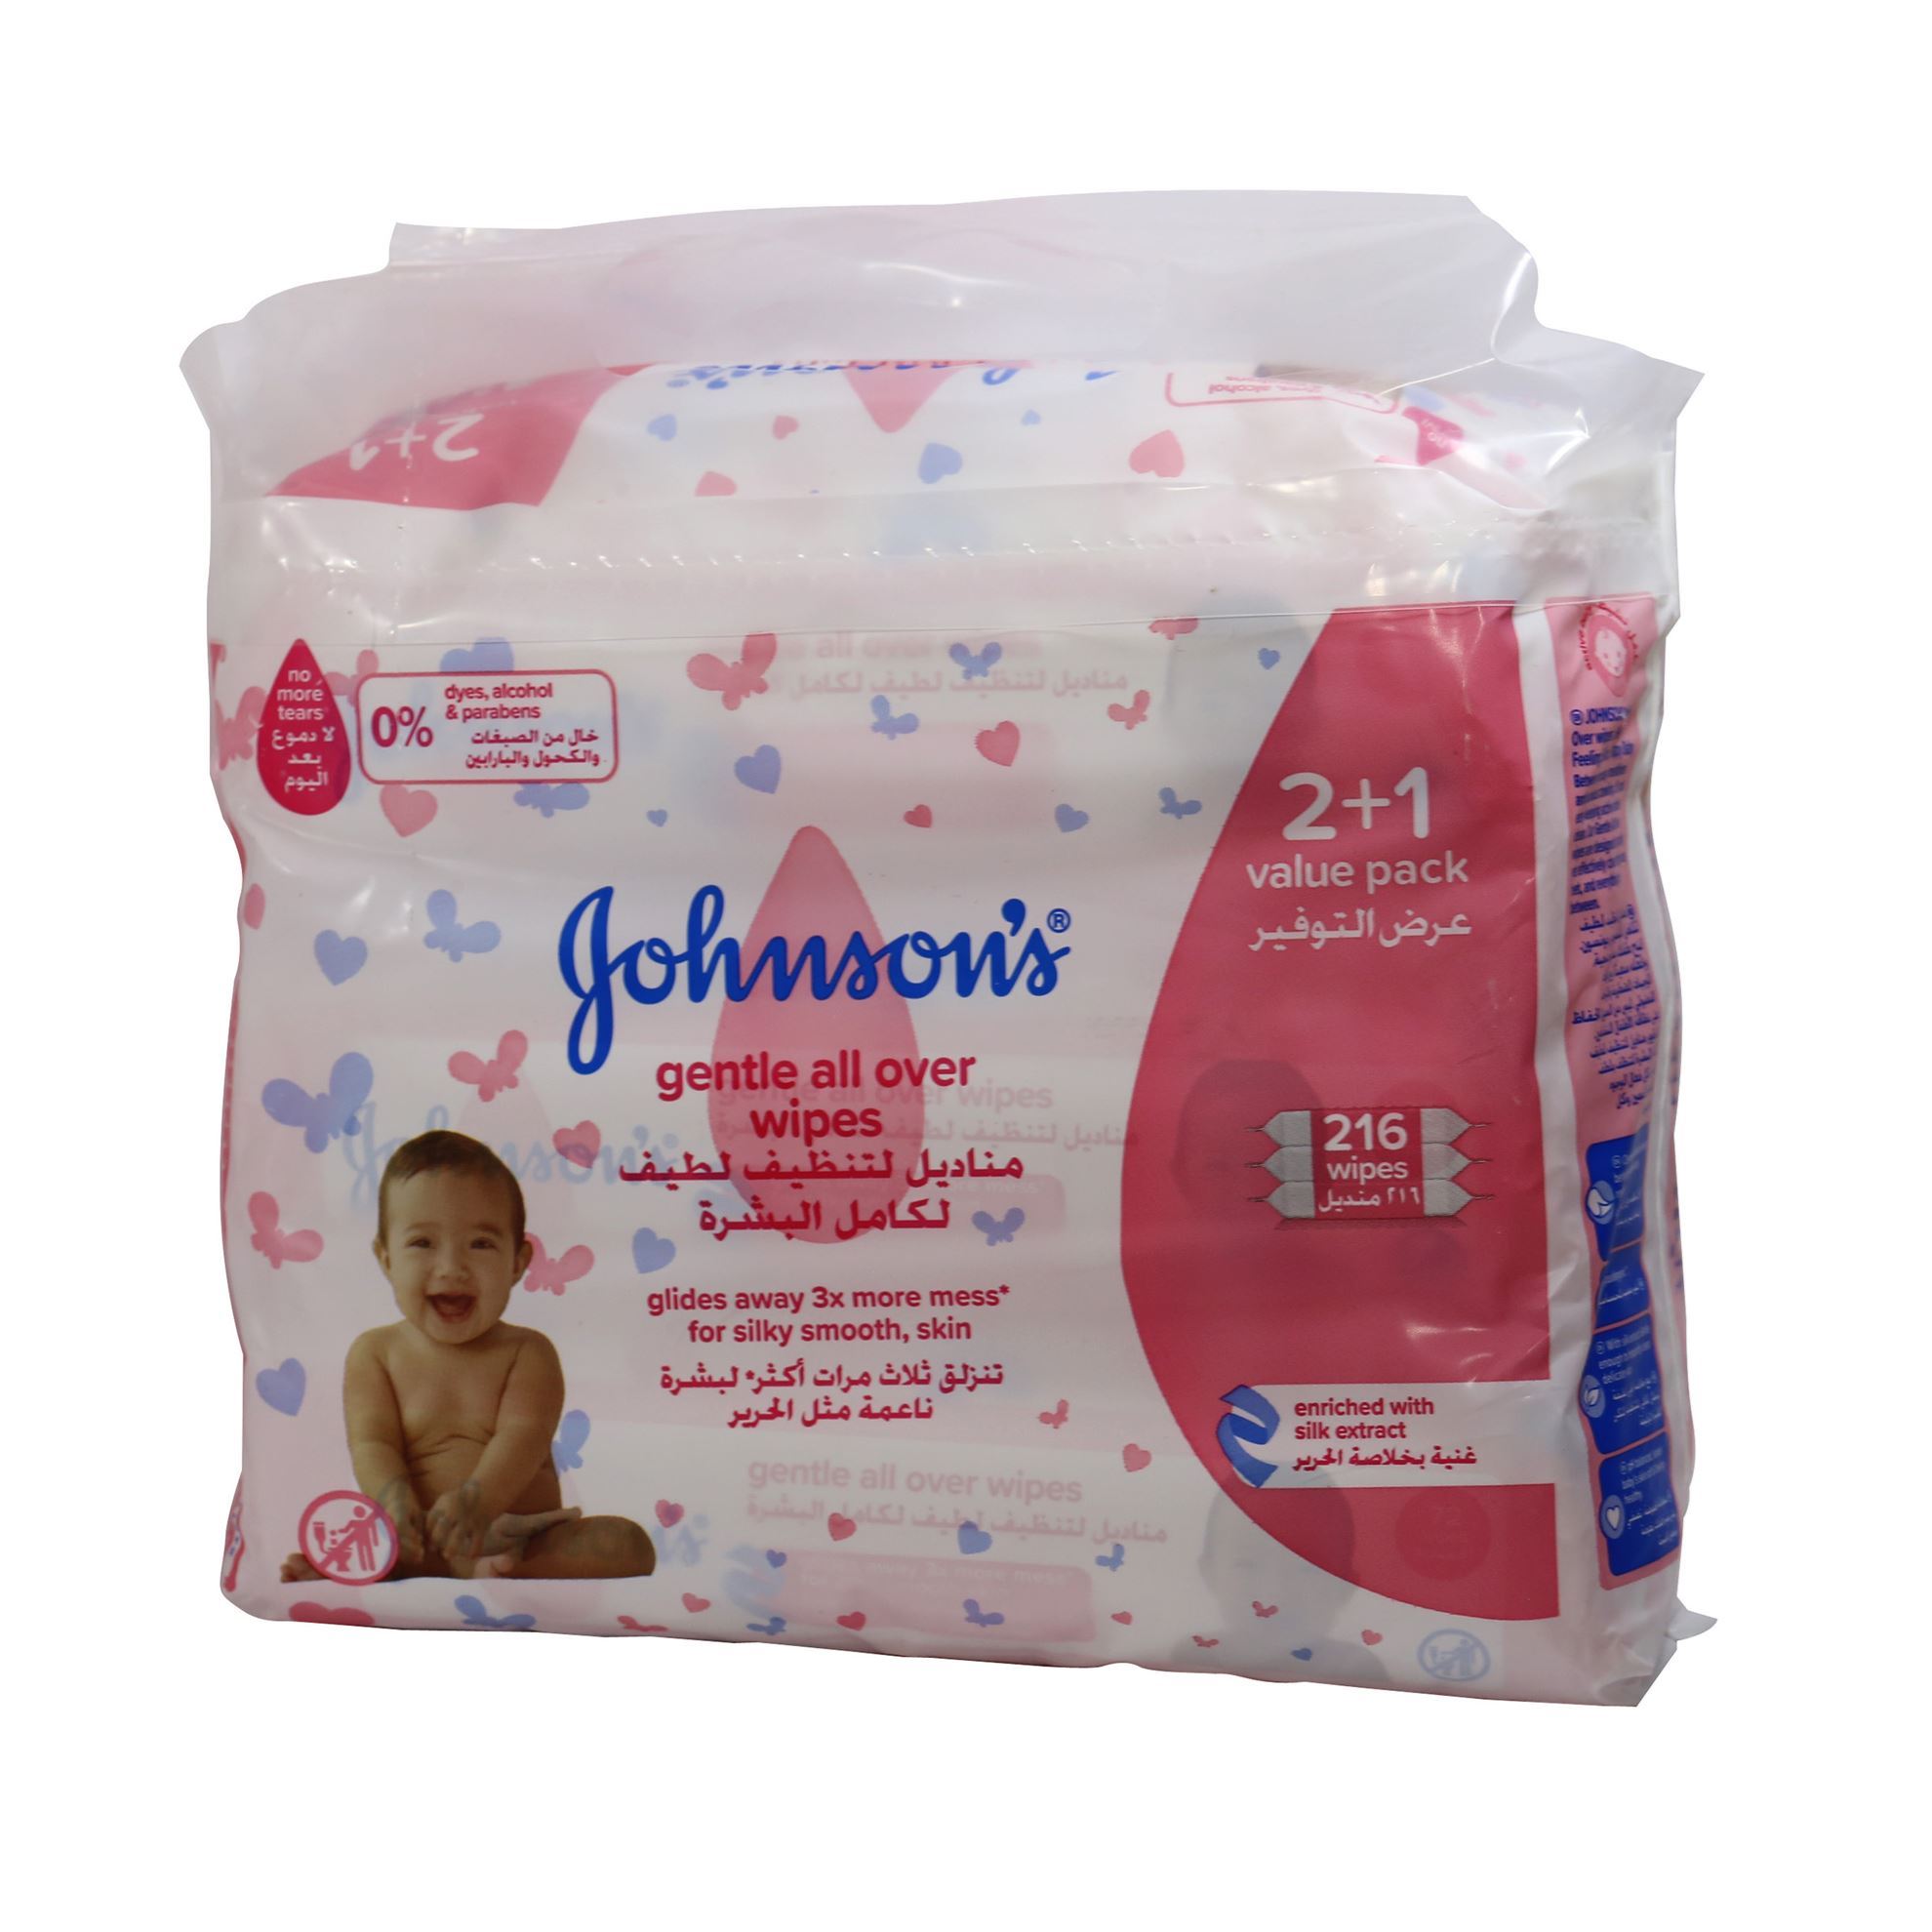 JOHNSON AND JOHNSON BABY GENTLE ALL OVER WIPES 72 PIECES (VALUE PACK 2+1 FREE)